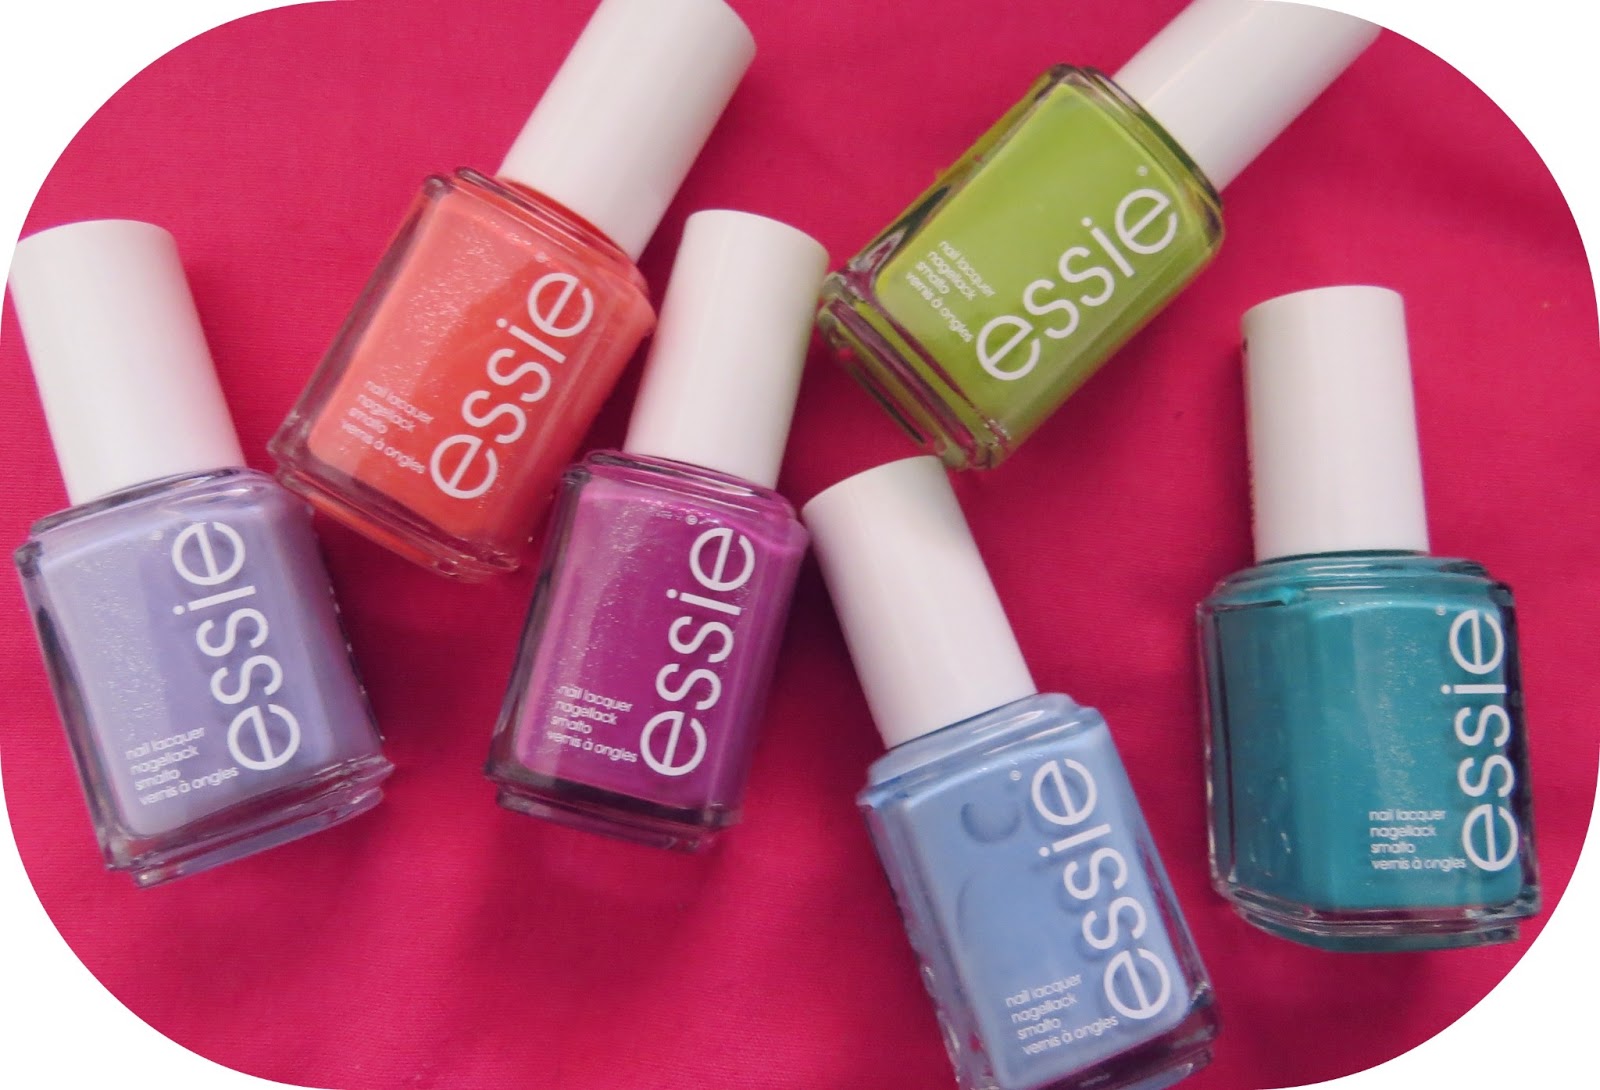 2. Essie Nail Polish in "Bare With Me" - wide 1